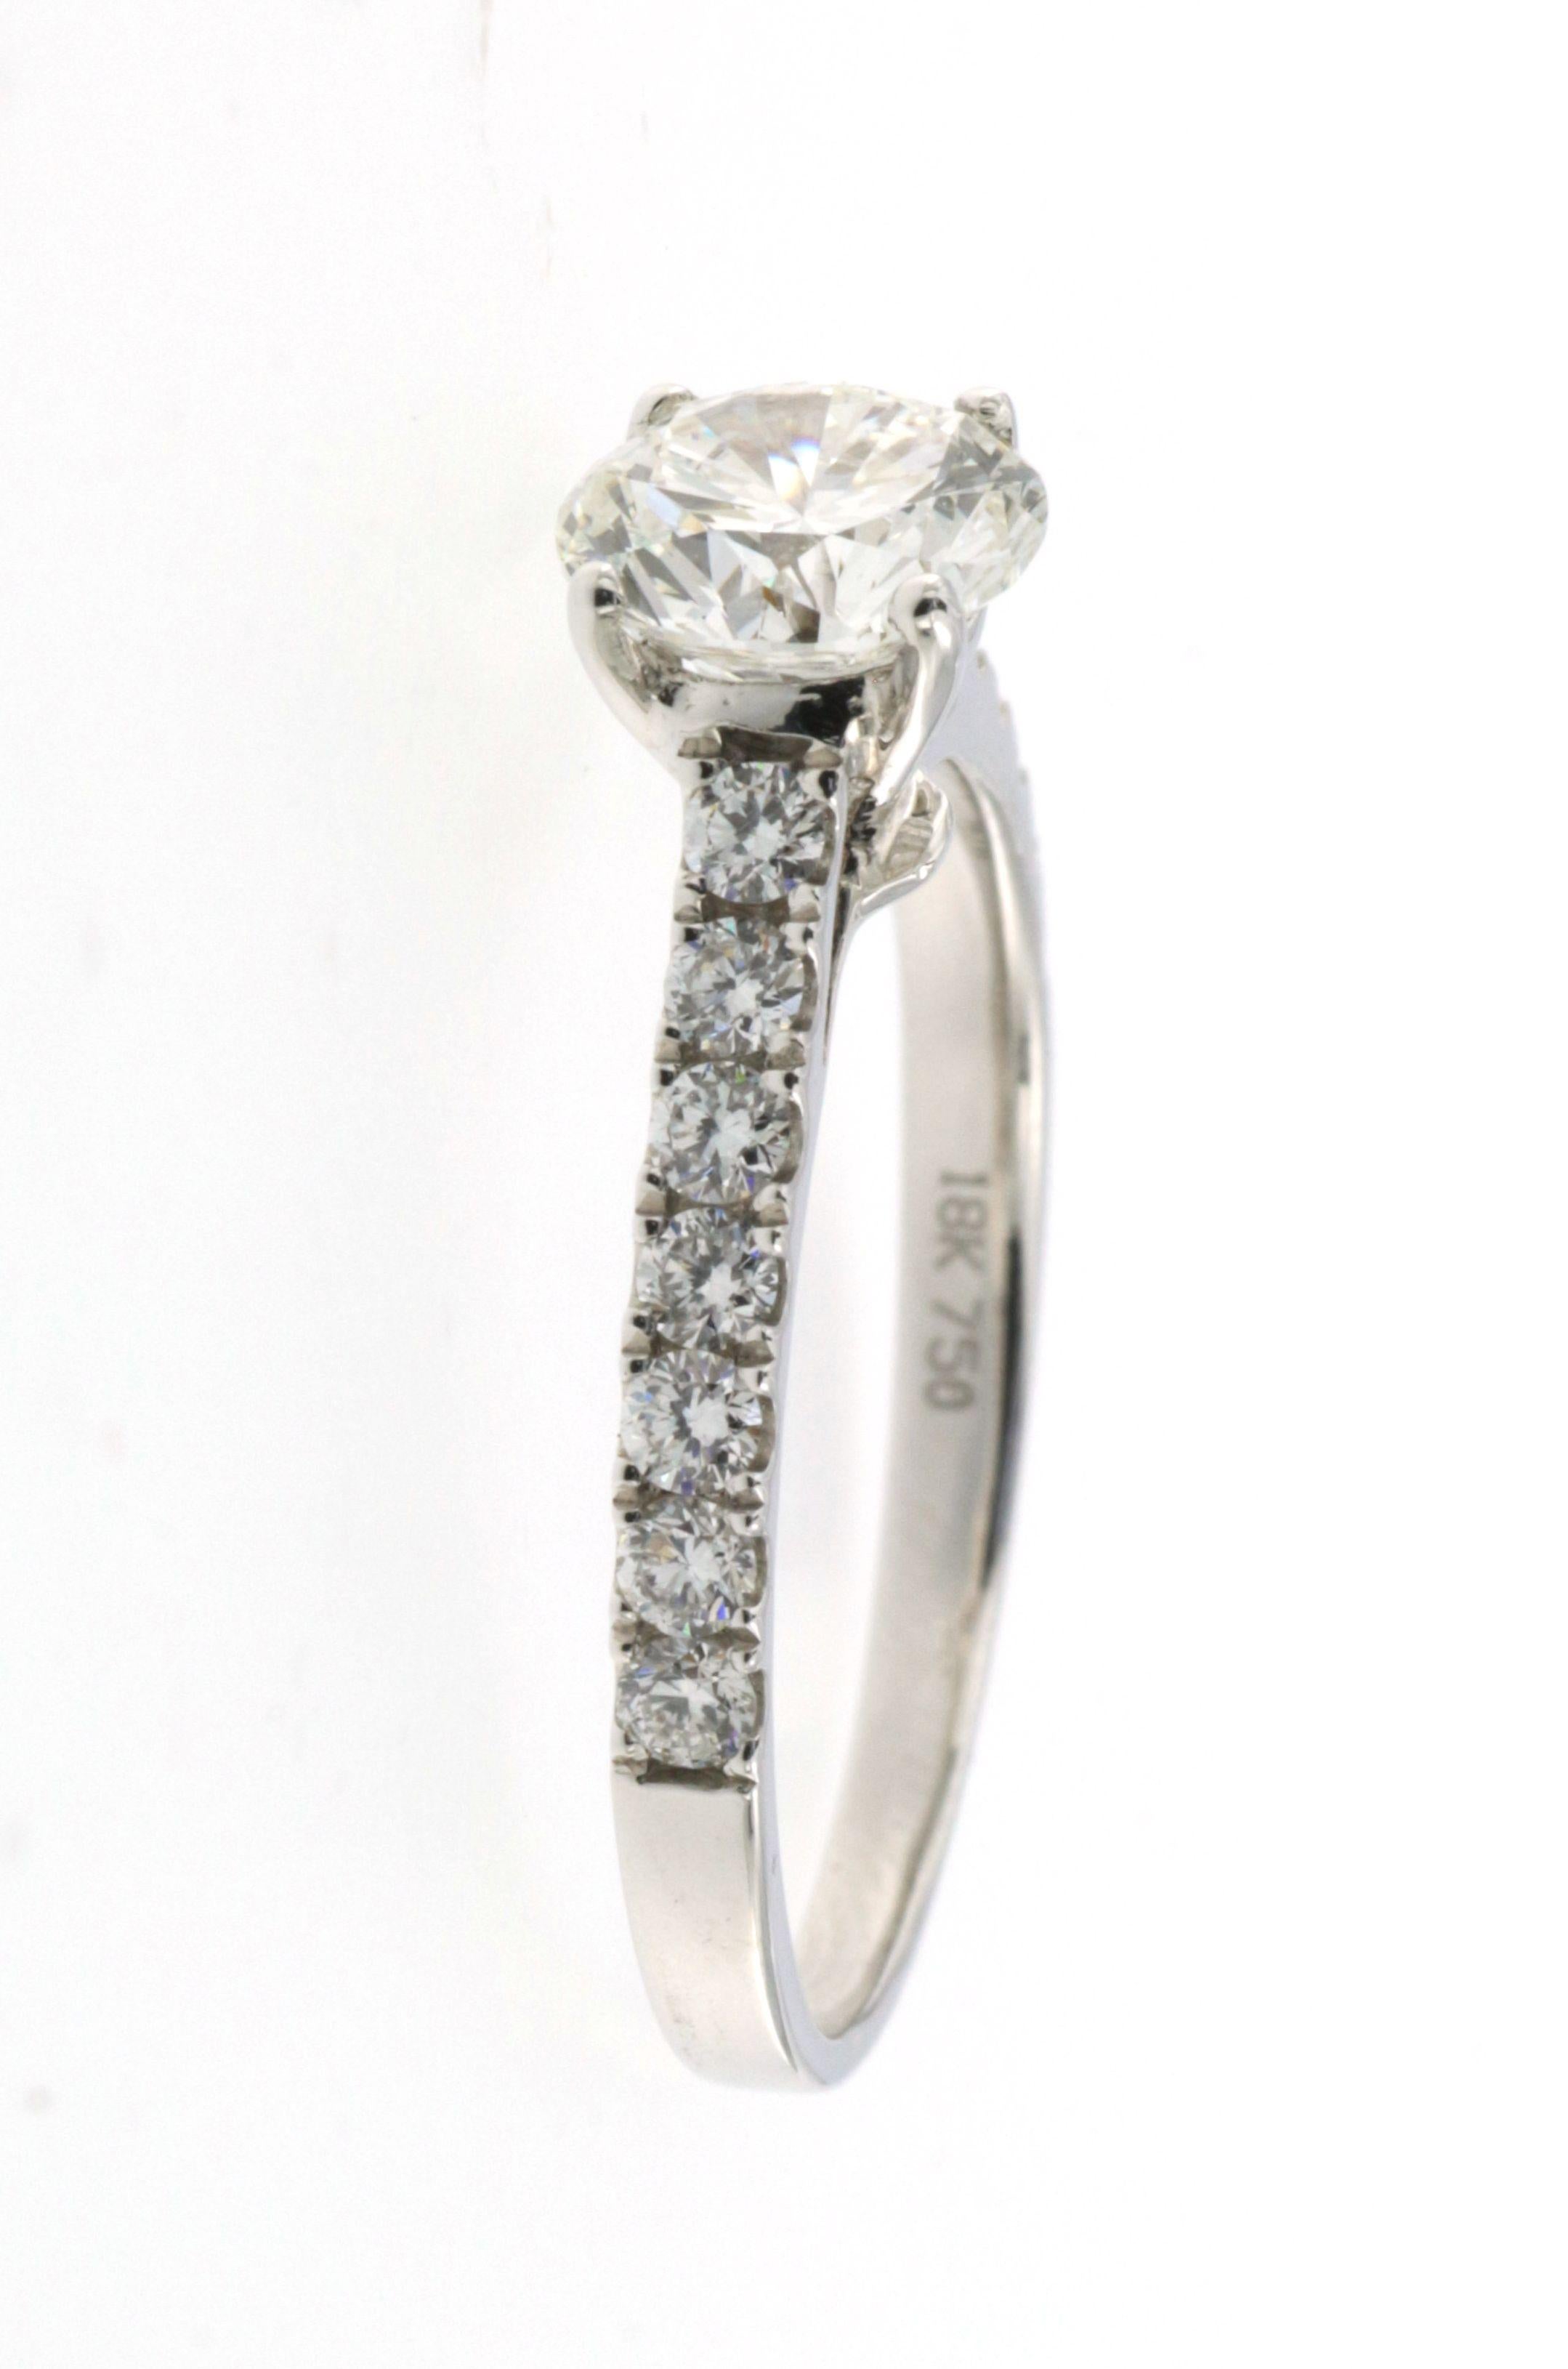 Contemporary 1.02 Carat G VVS2 Round Diamond Ring in 18K White Gold For Sale